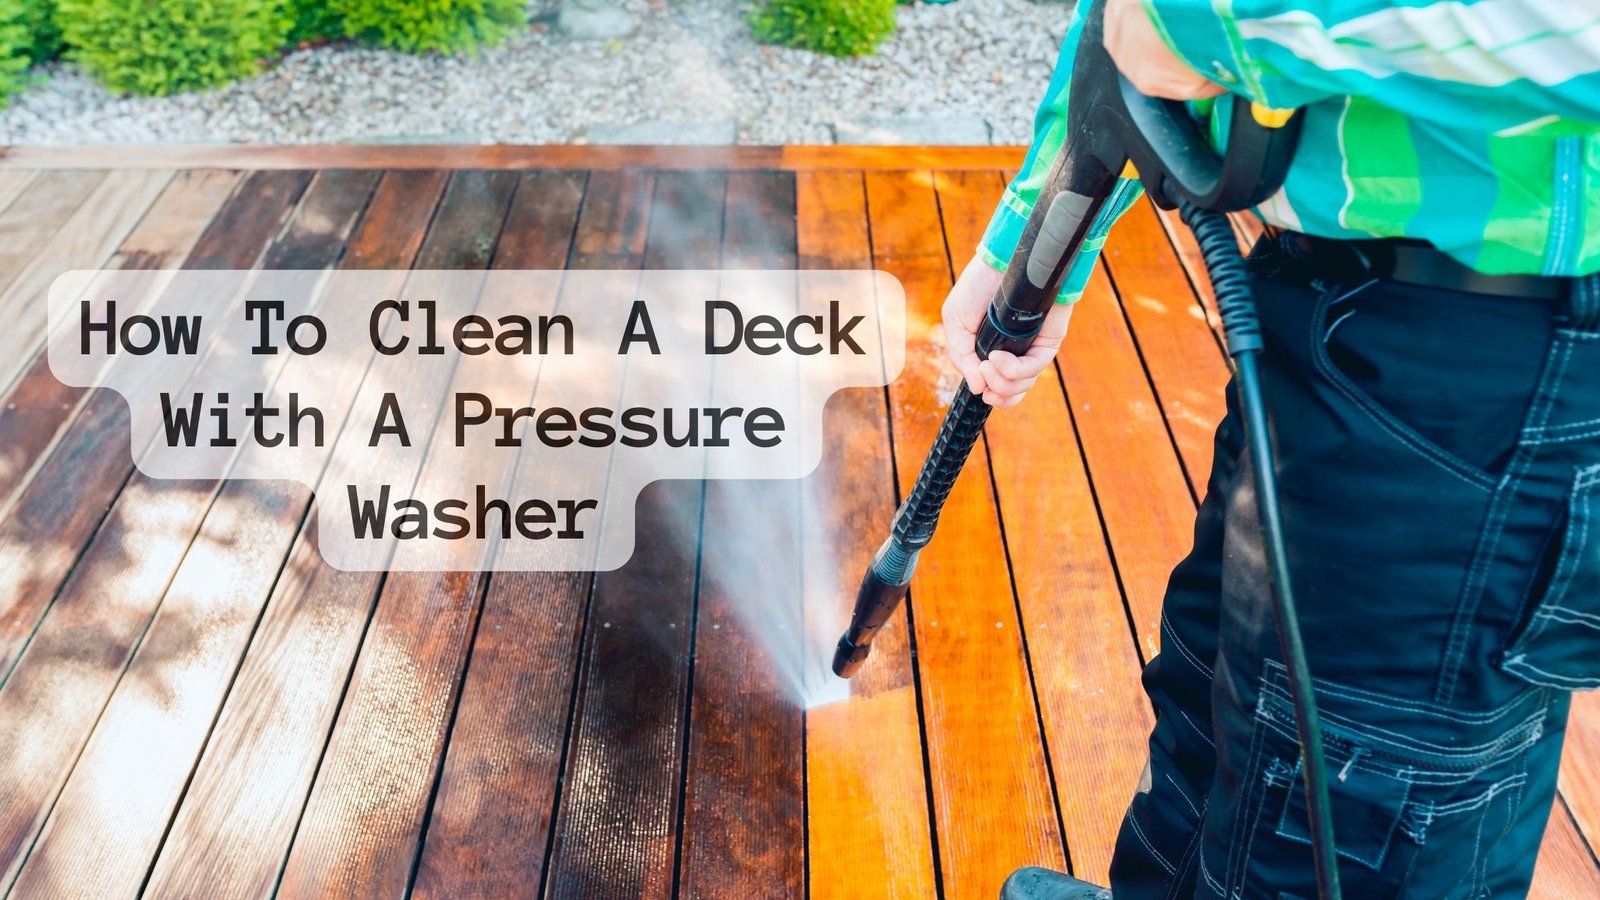 How To Clean A Deck With A Pressure Washer